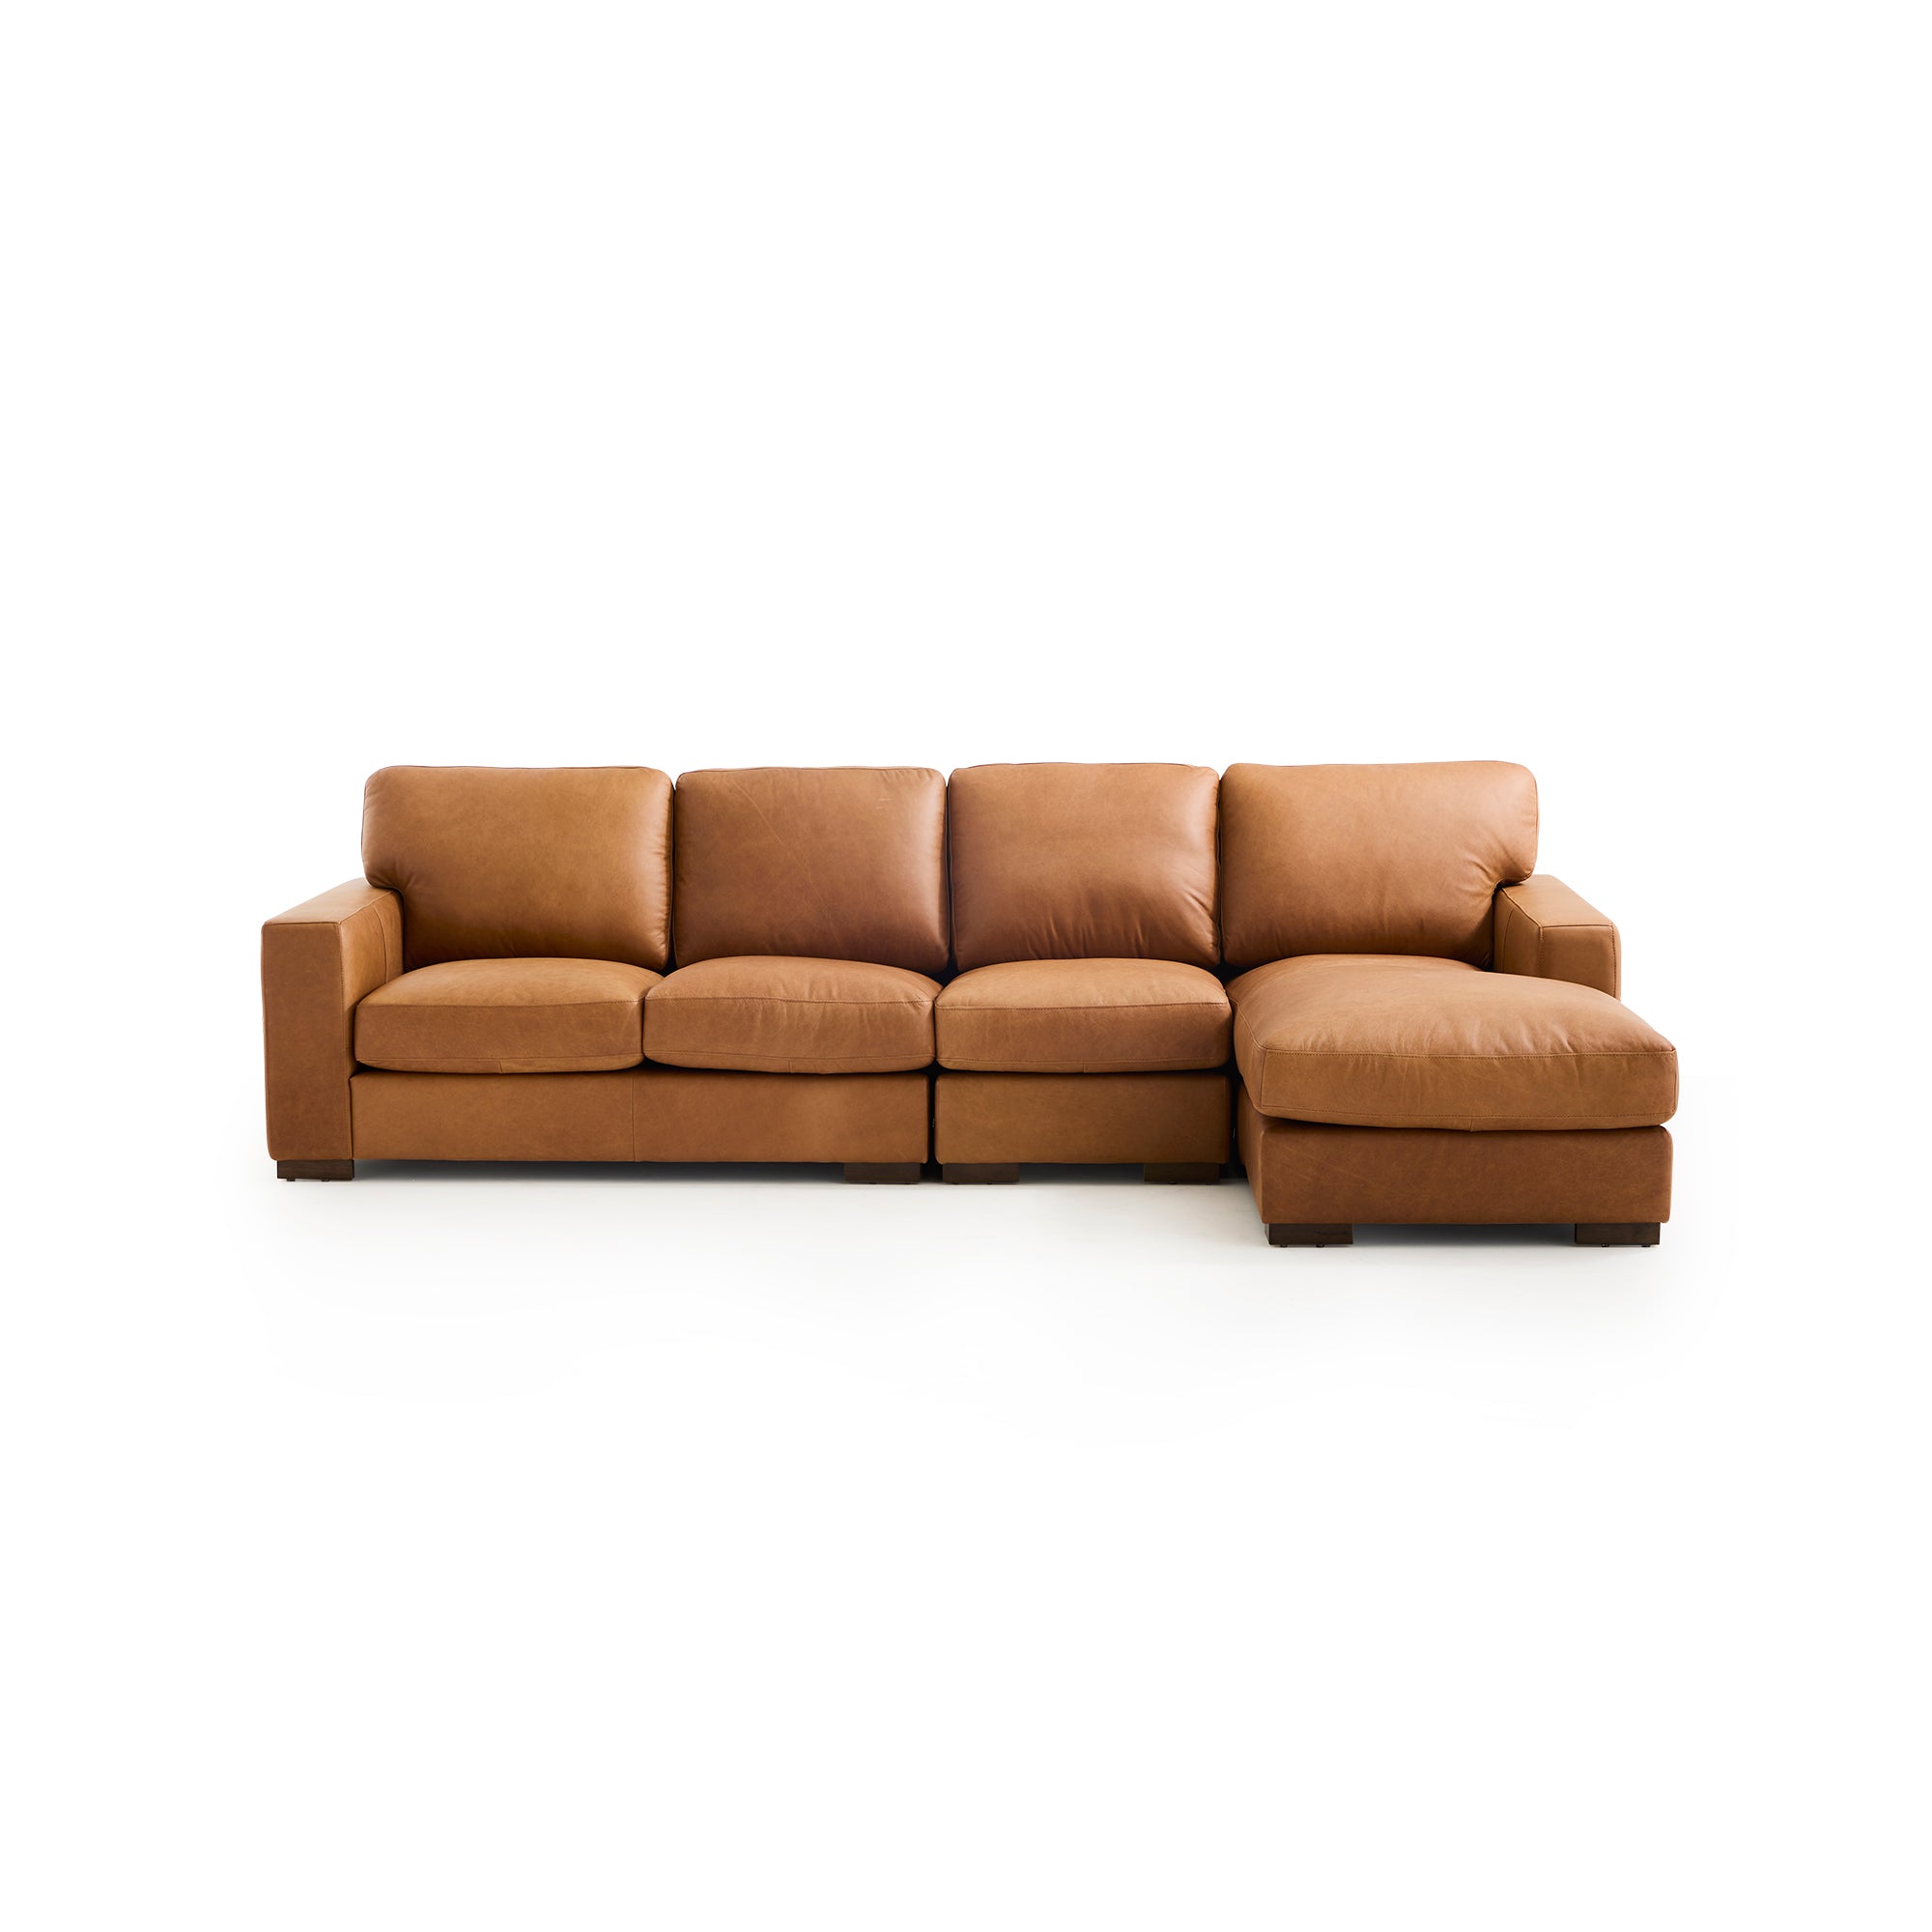 Tolland RAF Chaise Shaped Sectional Chestnut leather